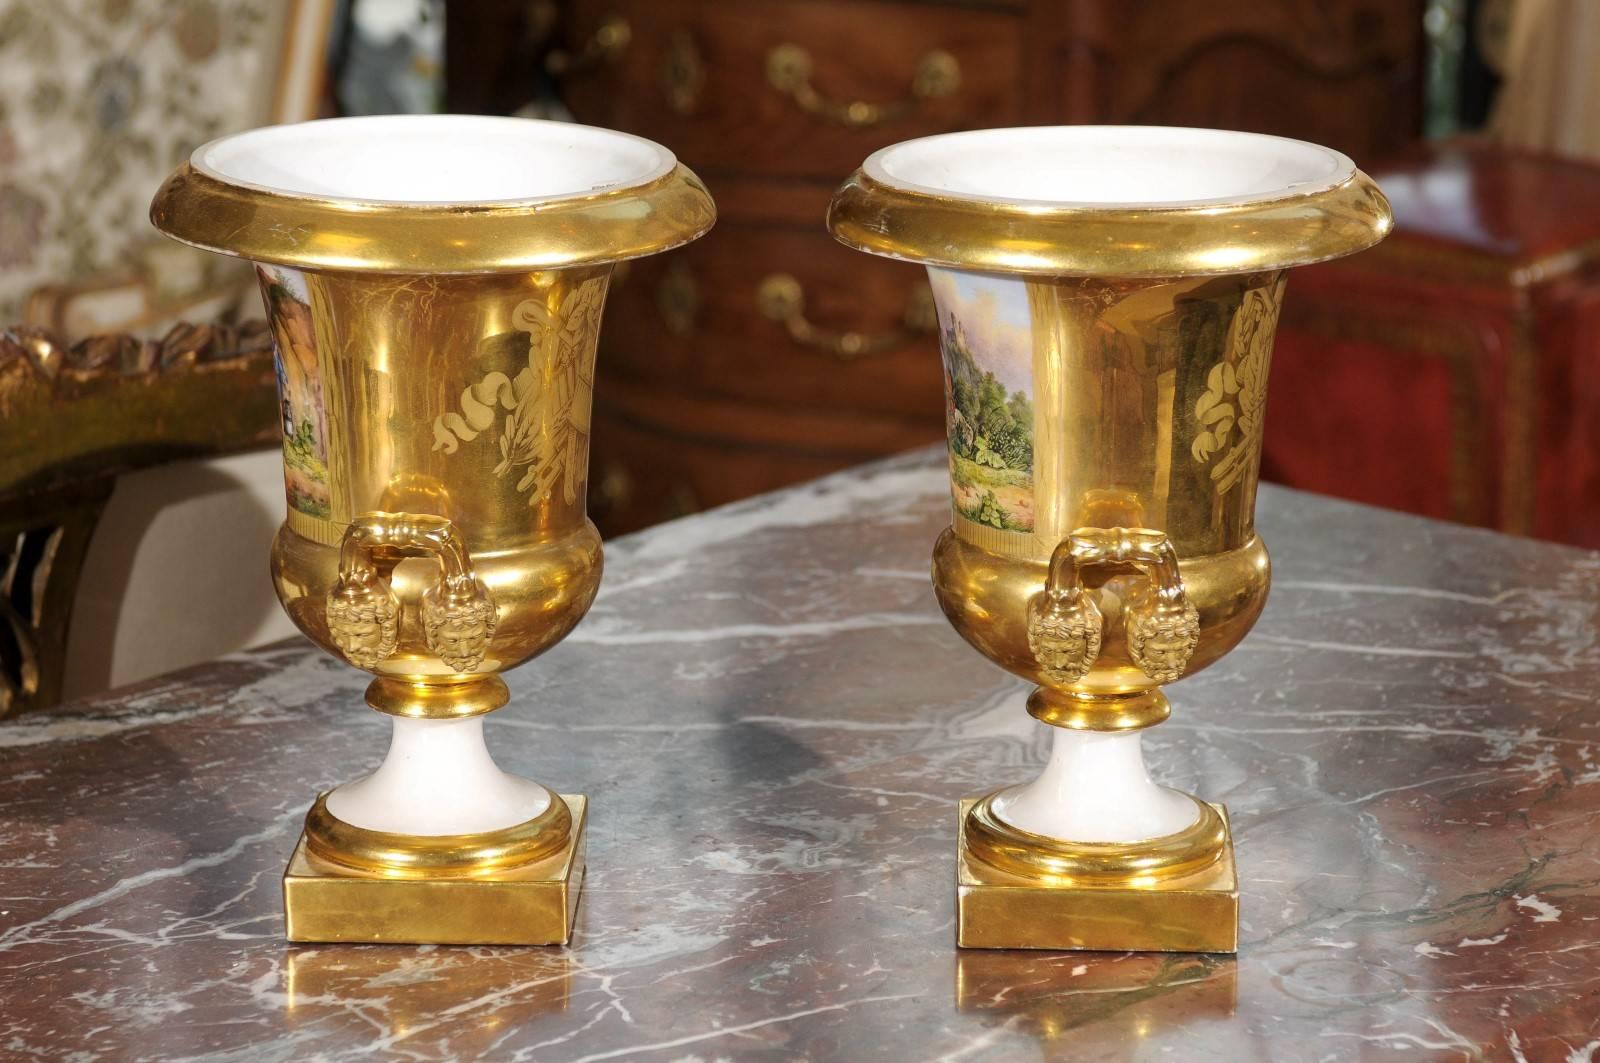 Pair of 19th Century French Paris Porcelain Urns with Painted Scenes & Handles For Sale 1